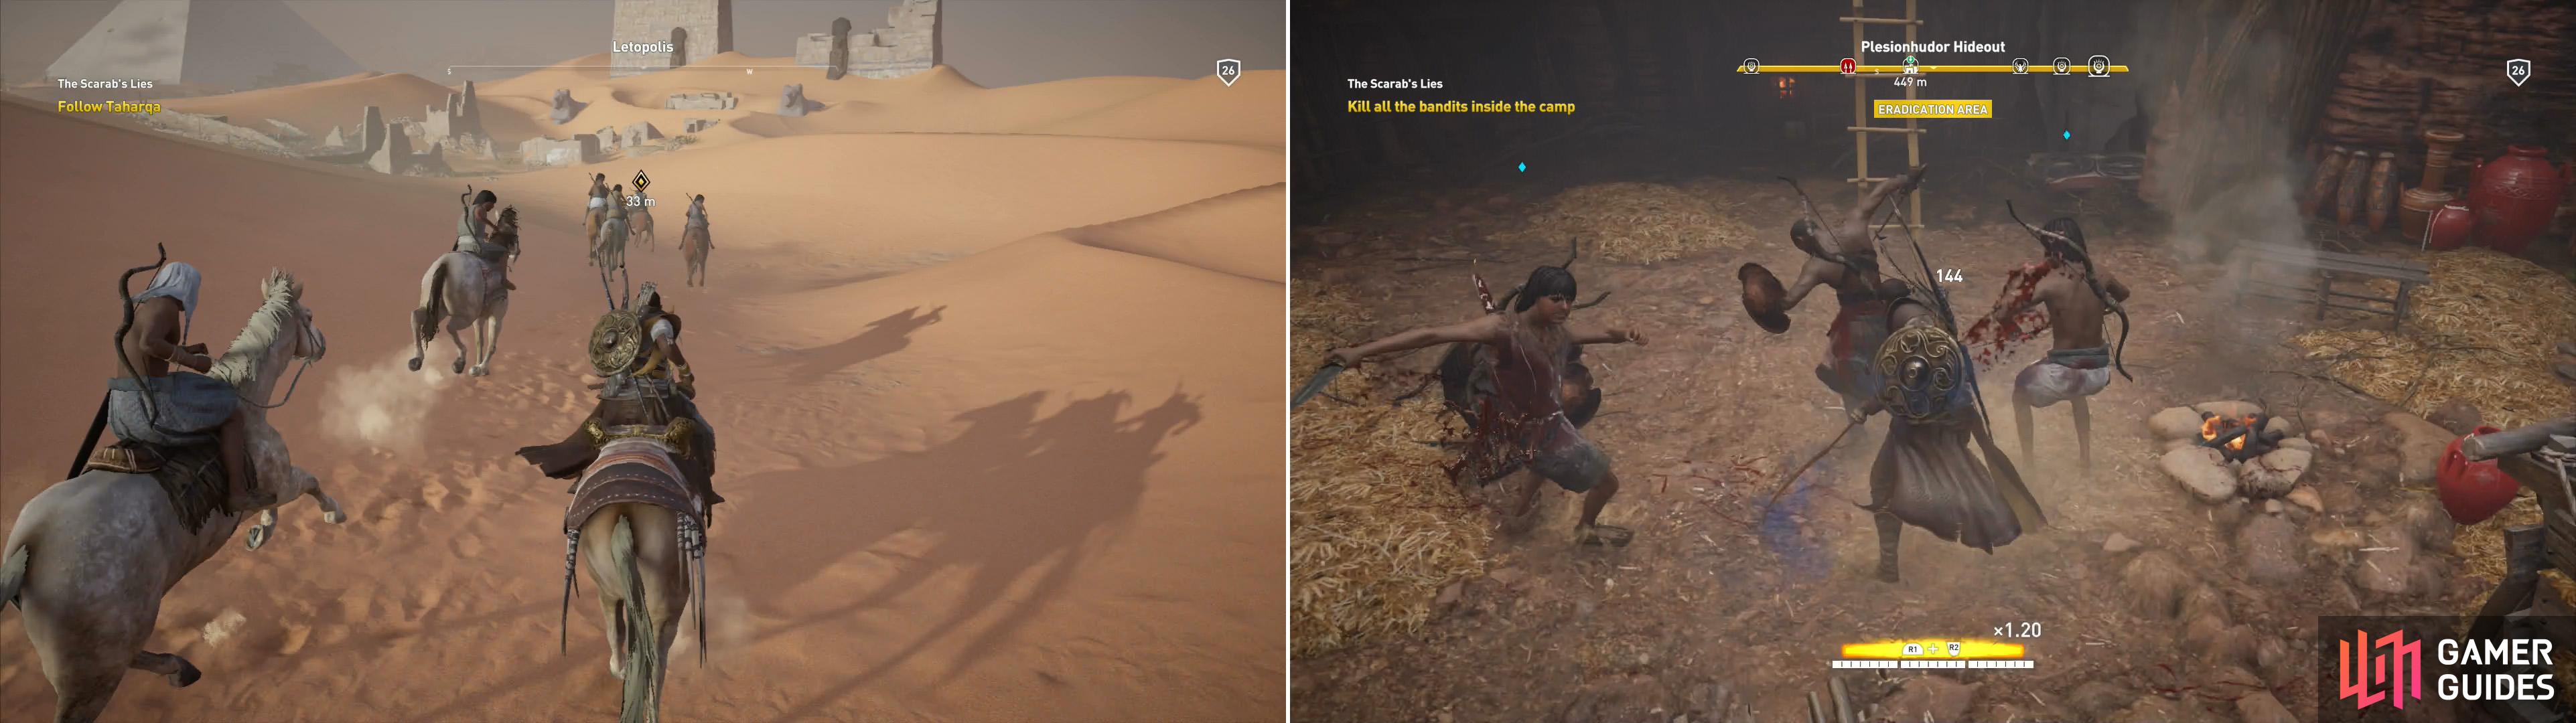 Join Taharqa’s men as they ride out for revenge (left) and slay the bandits at the Plesionhudor Hideout (right).